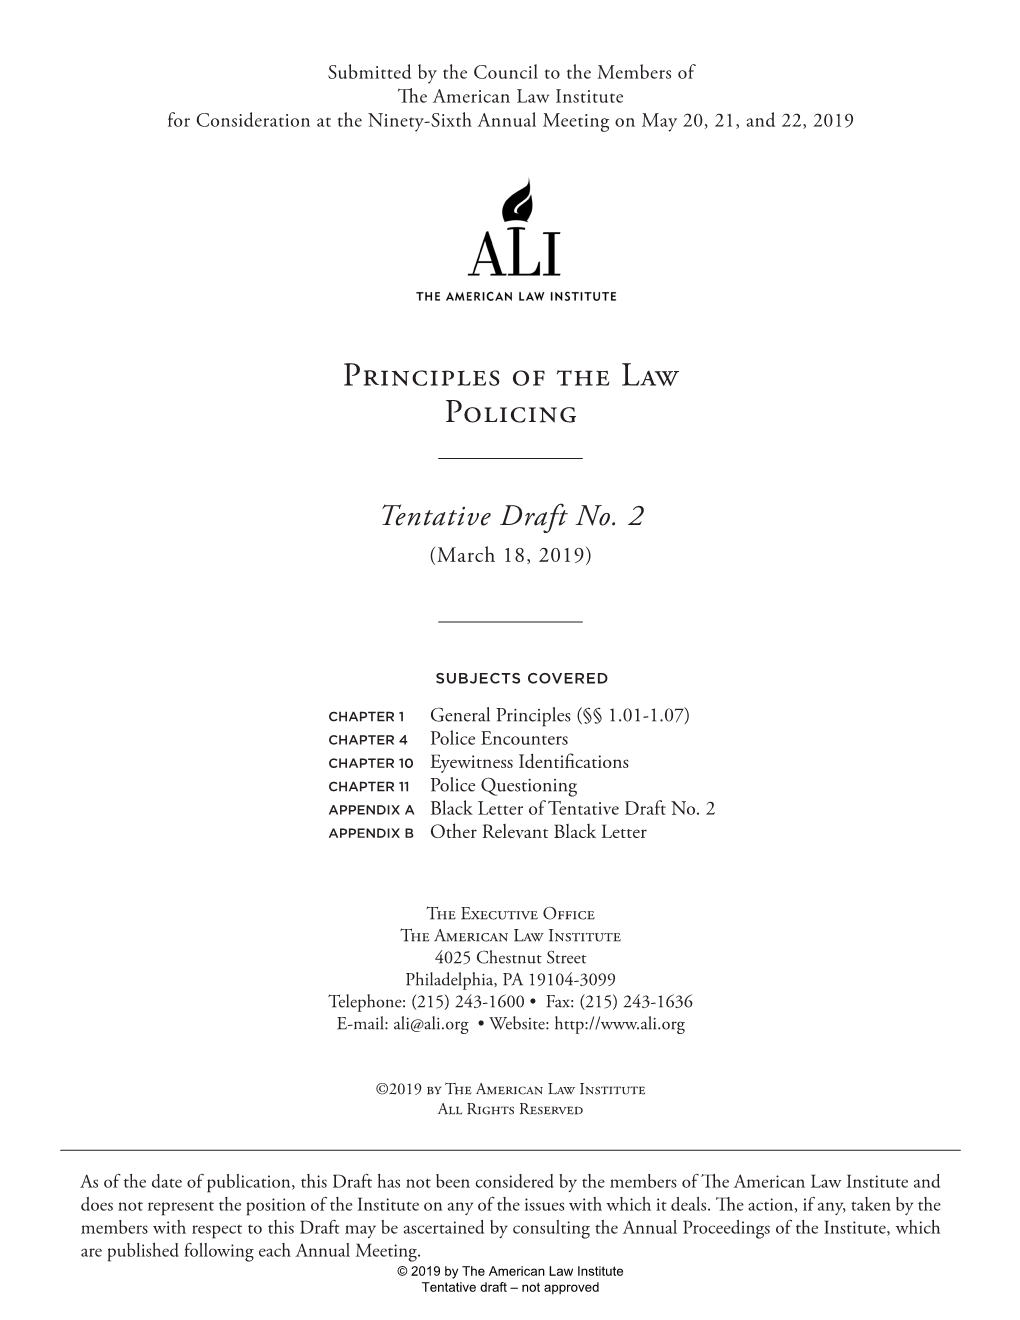 Download Principles of the Law, Policing